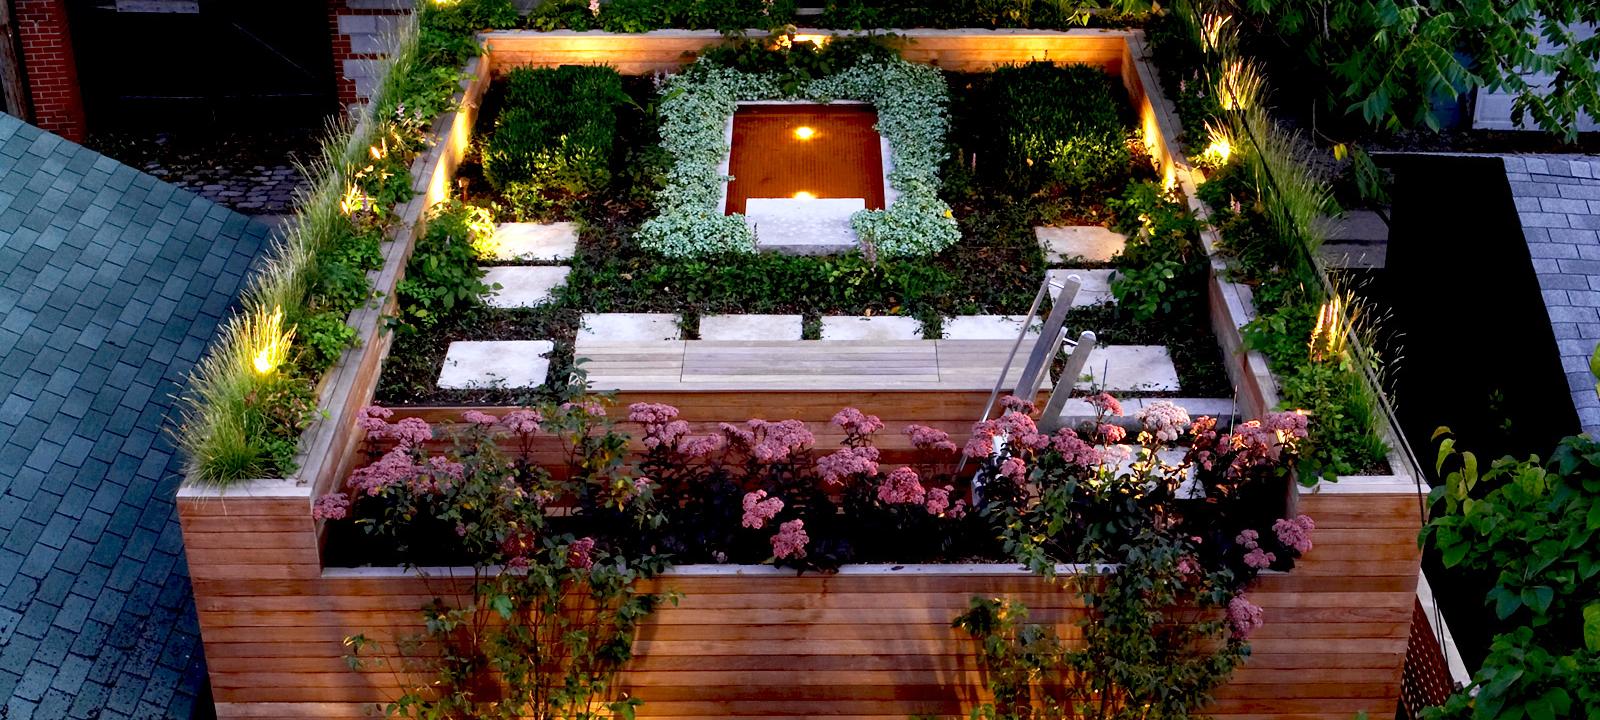 Illuminated roof garden with a pond at night